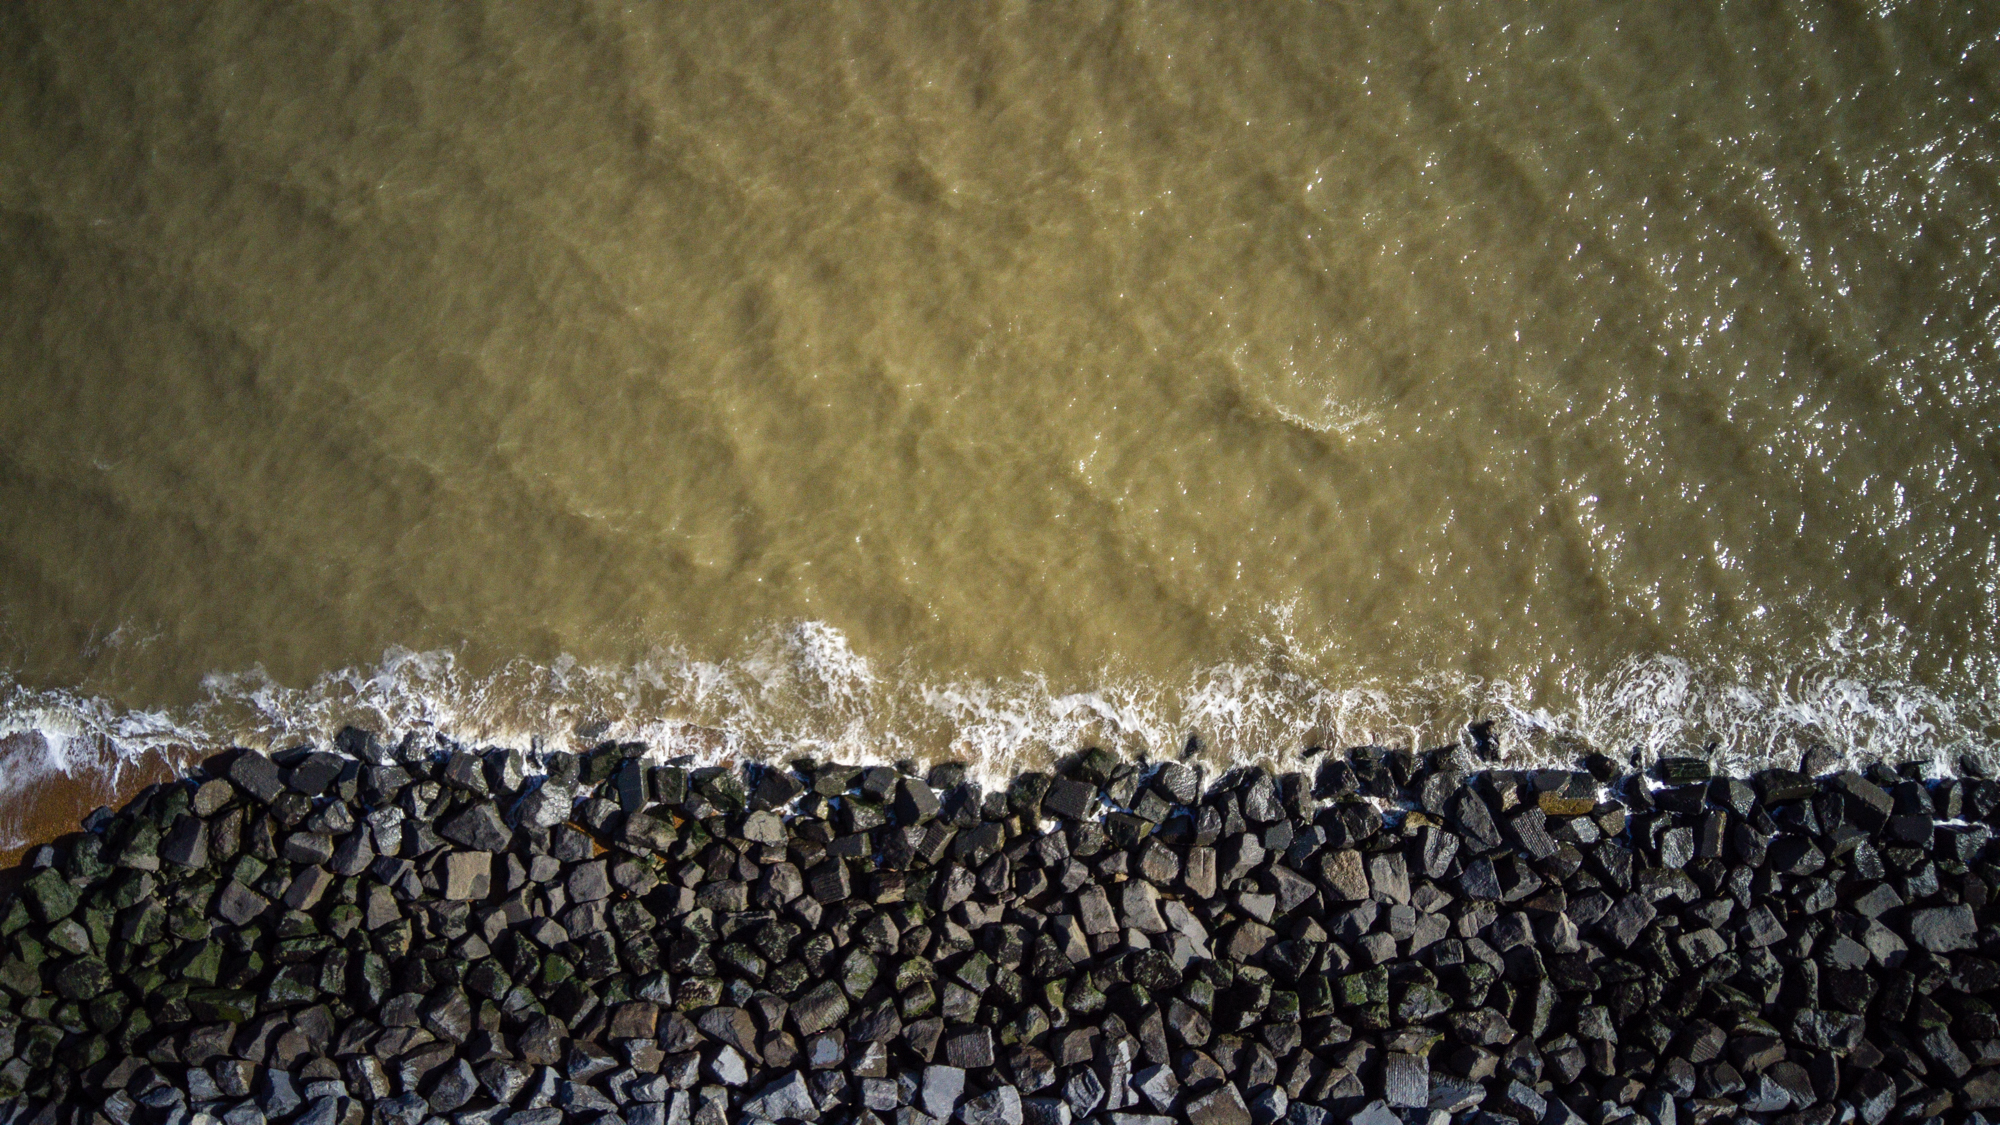 Photo of sea defences taken with the Potensic Atom drone